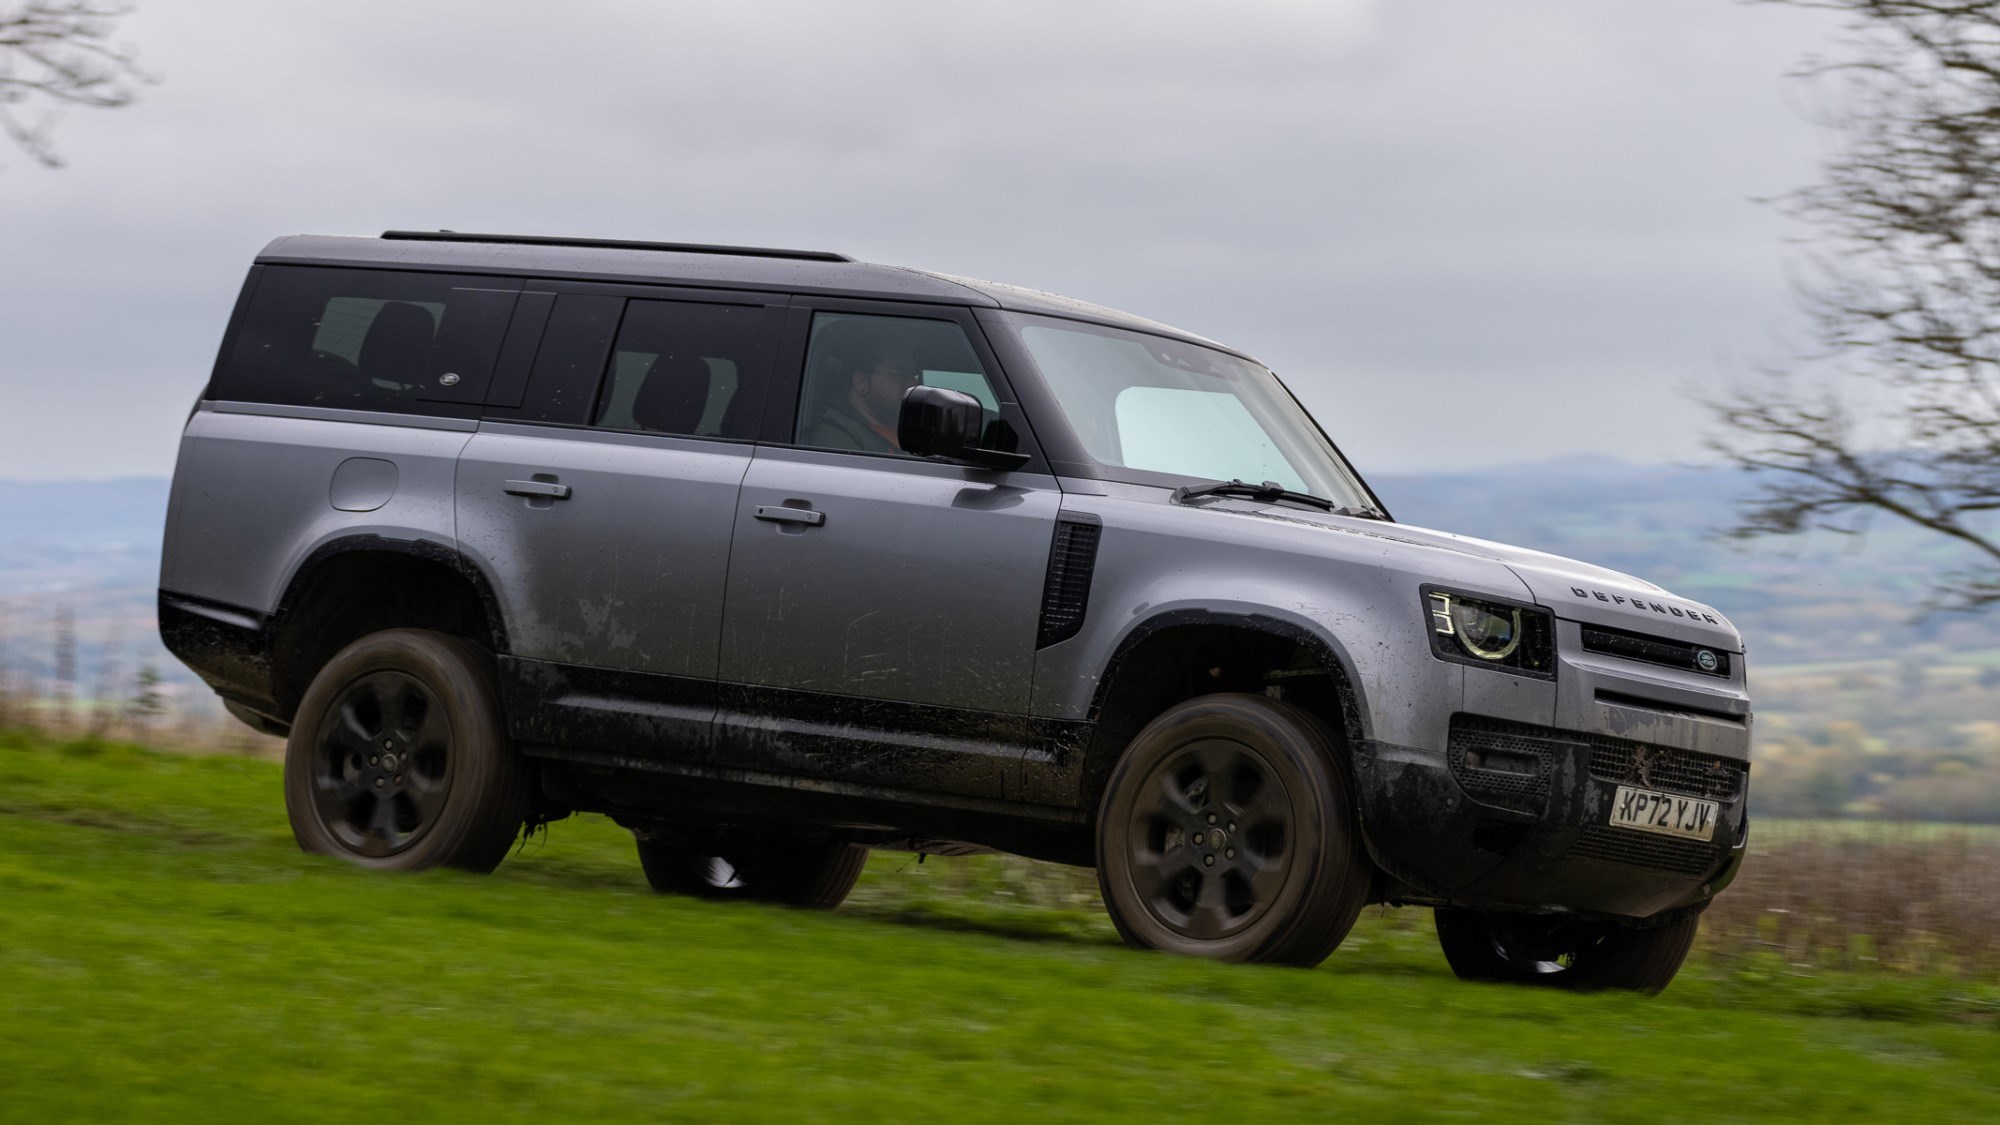 Land Rover Defender family to get all-new luxury flagship